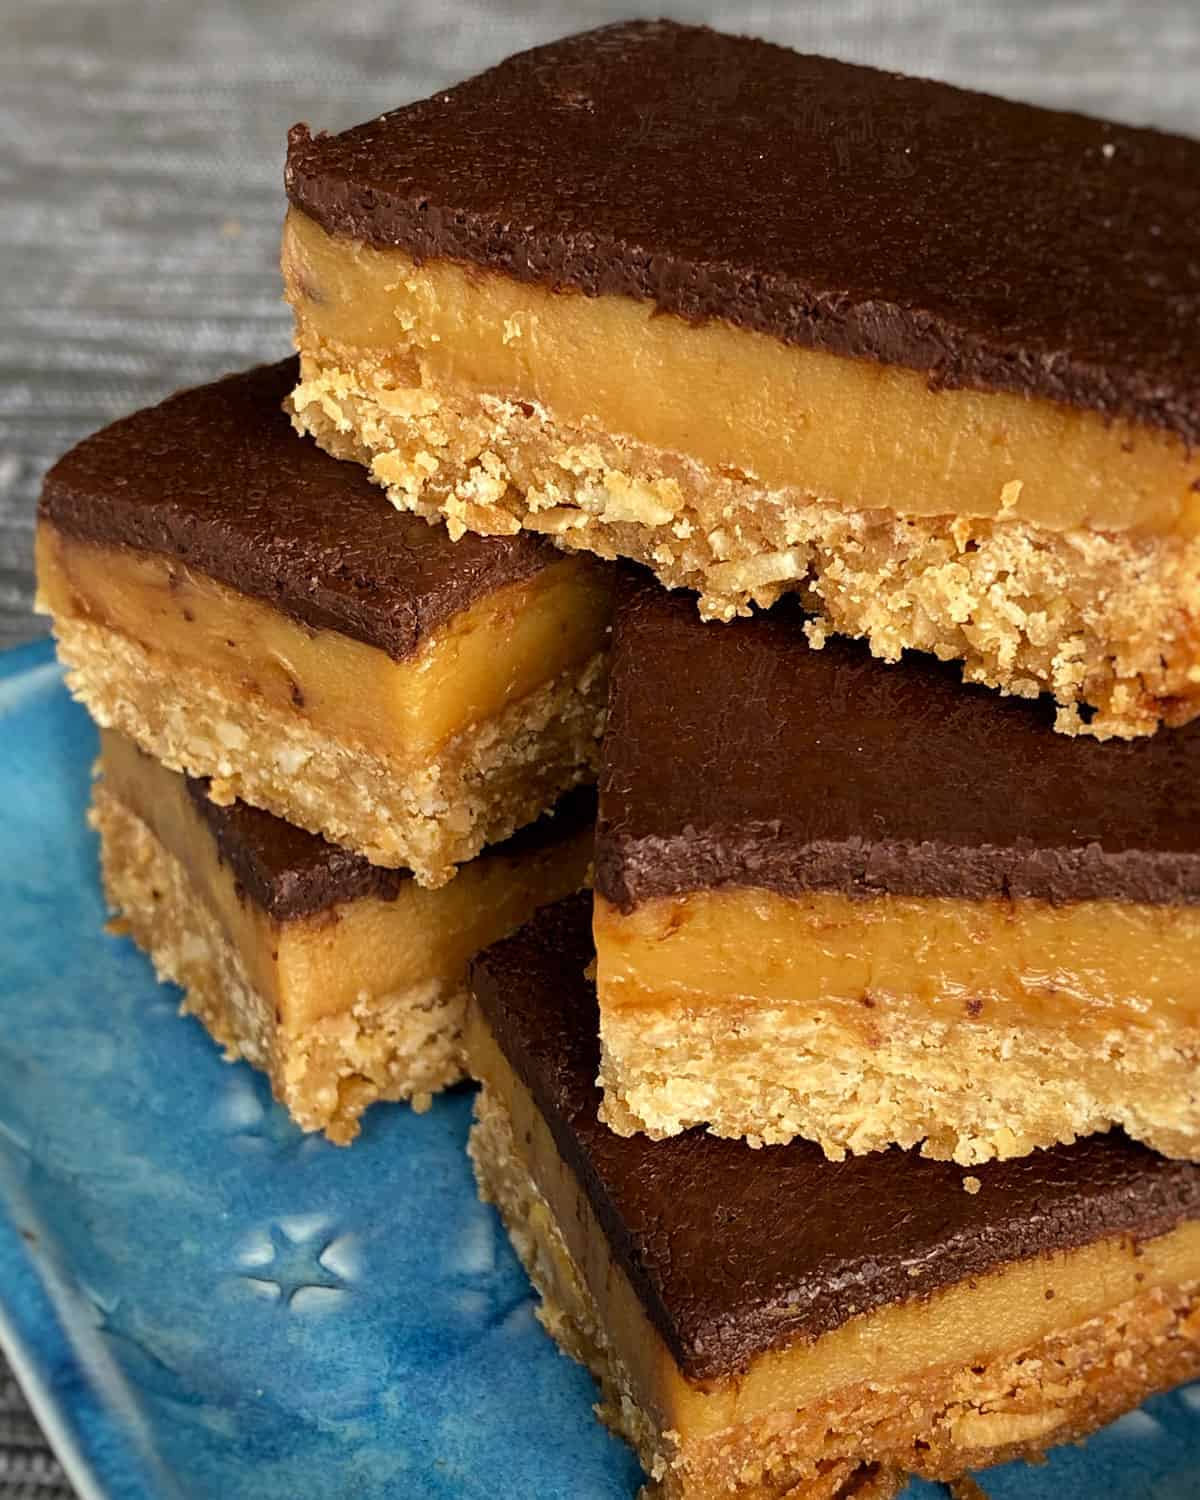 A close up of Caramel coconut slice on a blue plate.